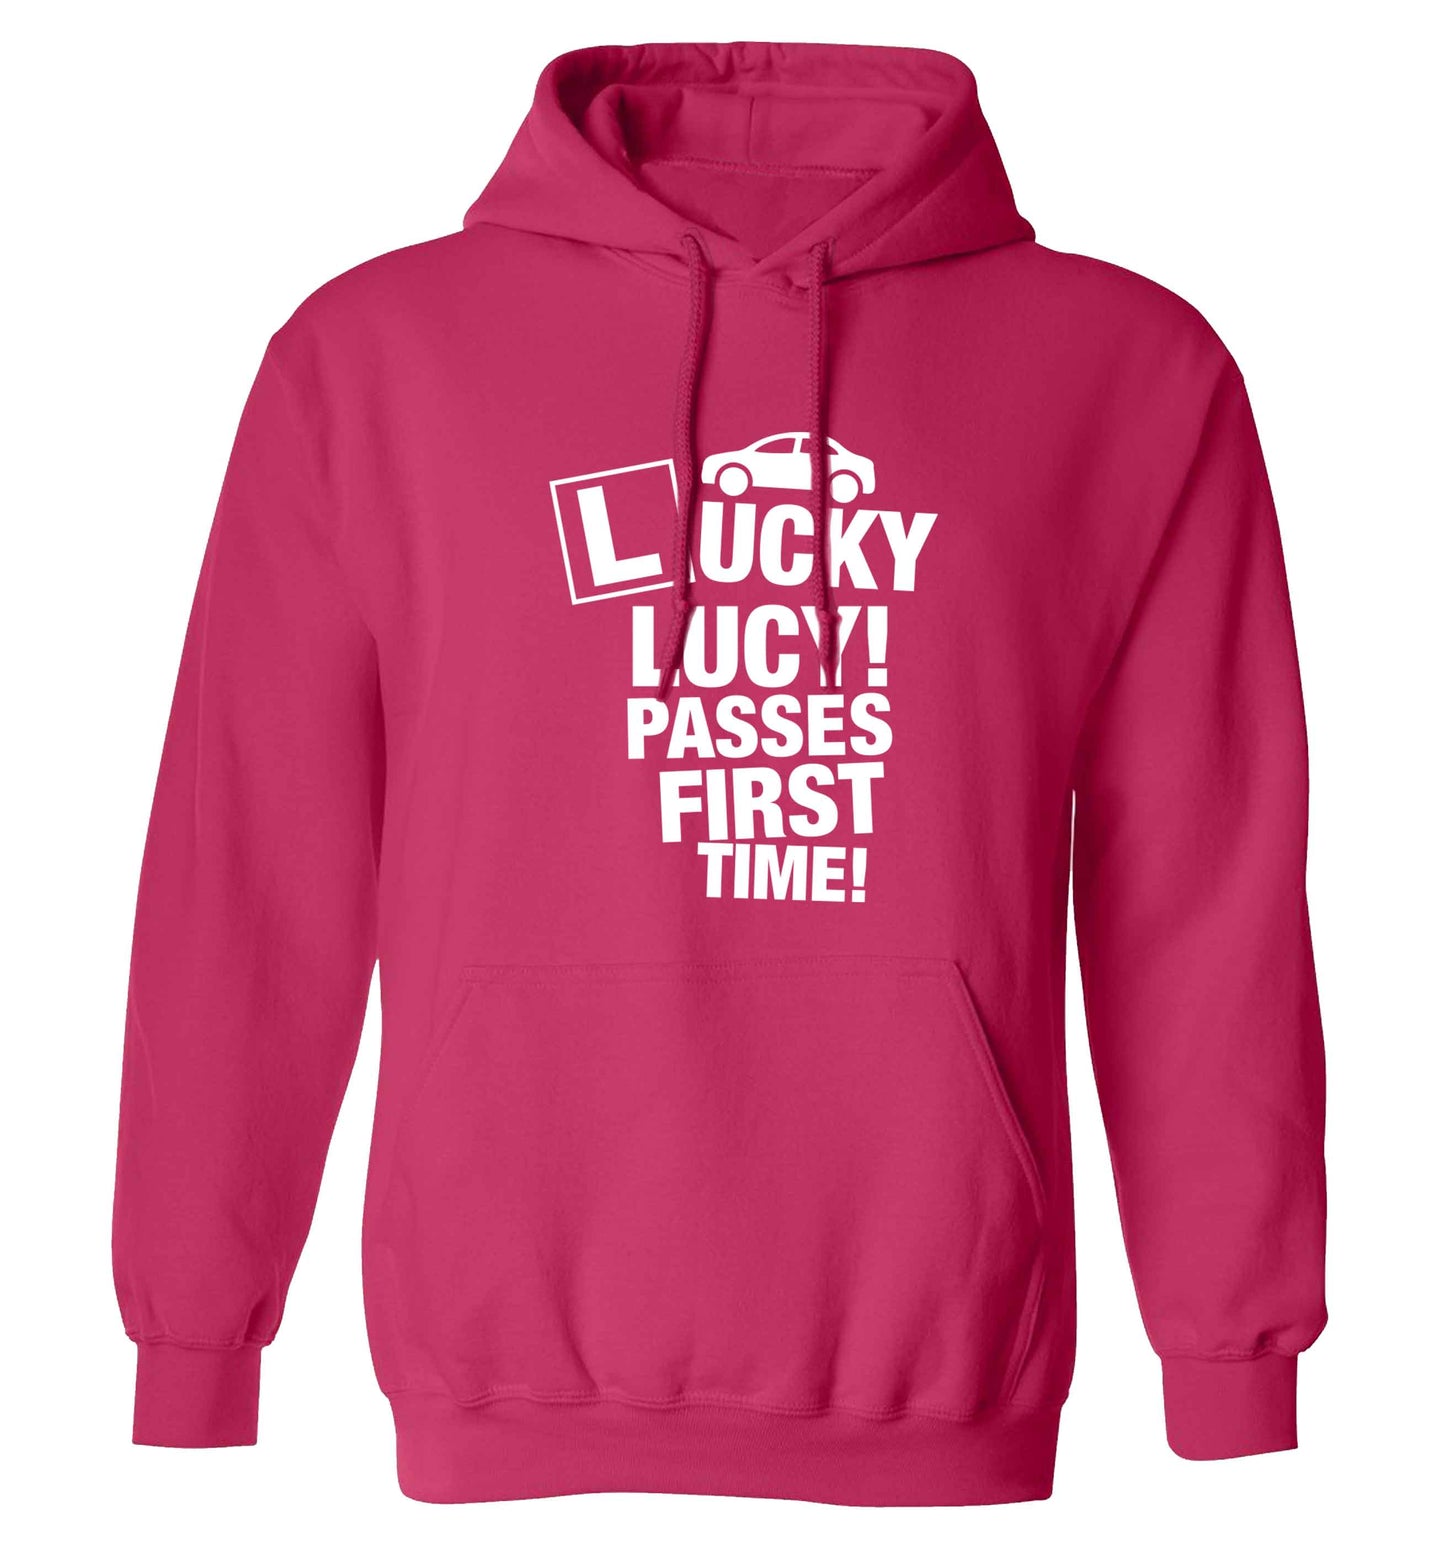 Personalised Lucky passes first time adults unisex pink hoodie 2XL